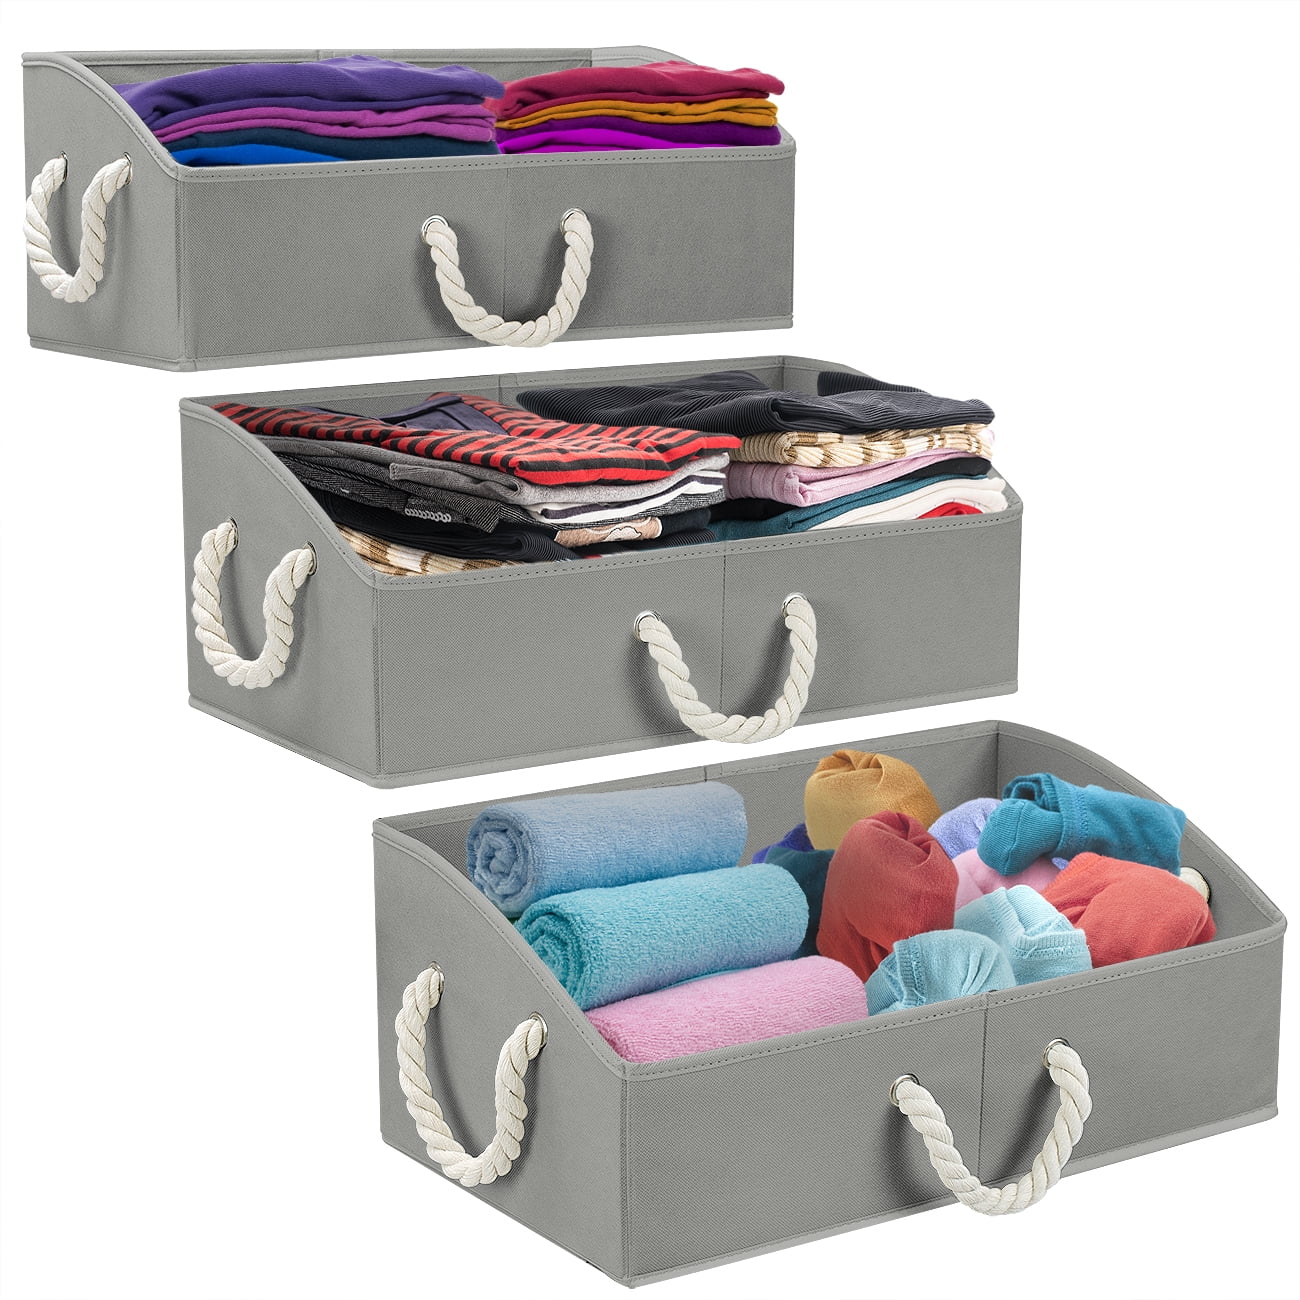 Book DVD 3 Packs Closet Storage Bins Foldable Fabric Baskets for Organizing Clothes Dark Grey, 20 x 11.2 x 8.3 inches Trapezoid Large Storage Box Toys Towel Baby Toiletry 